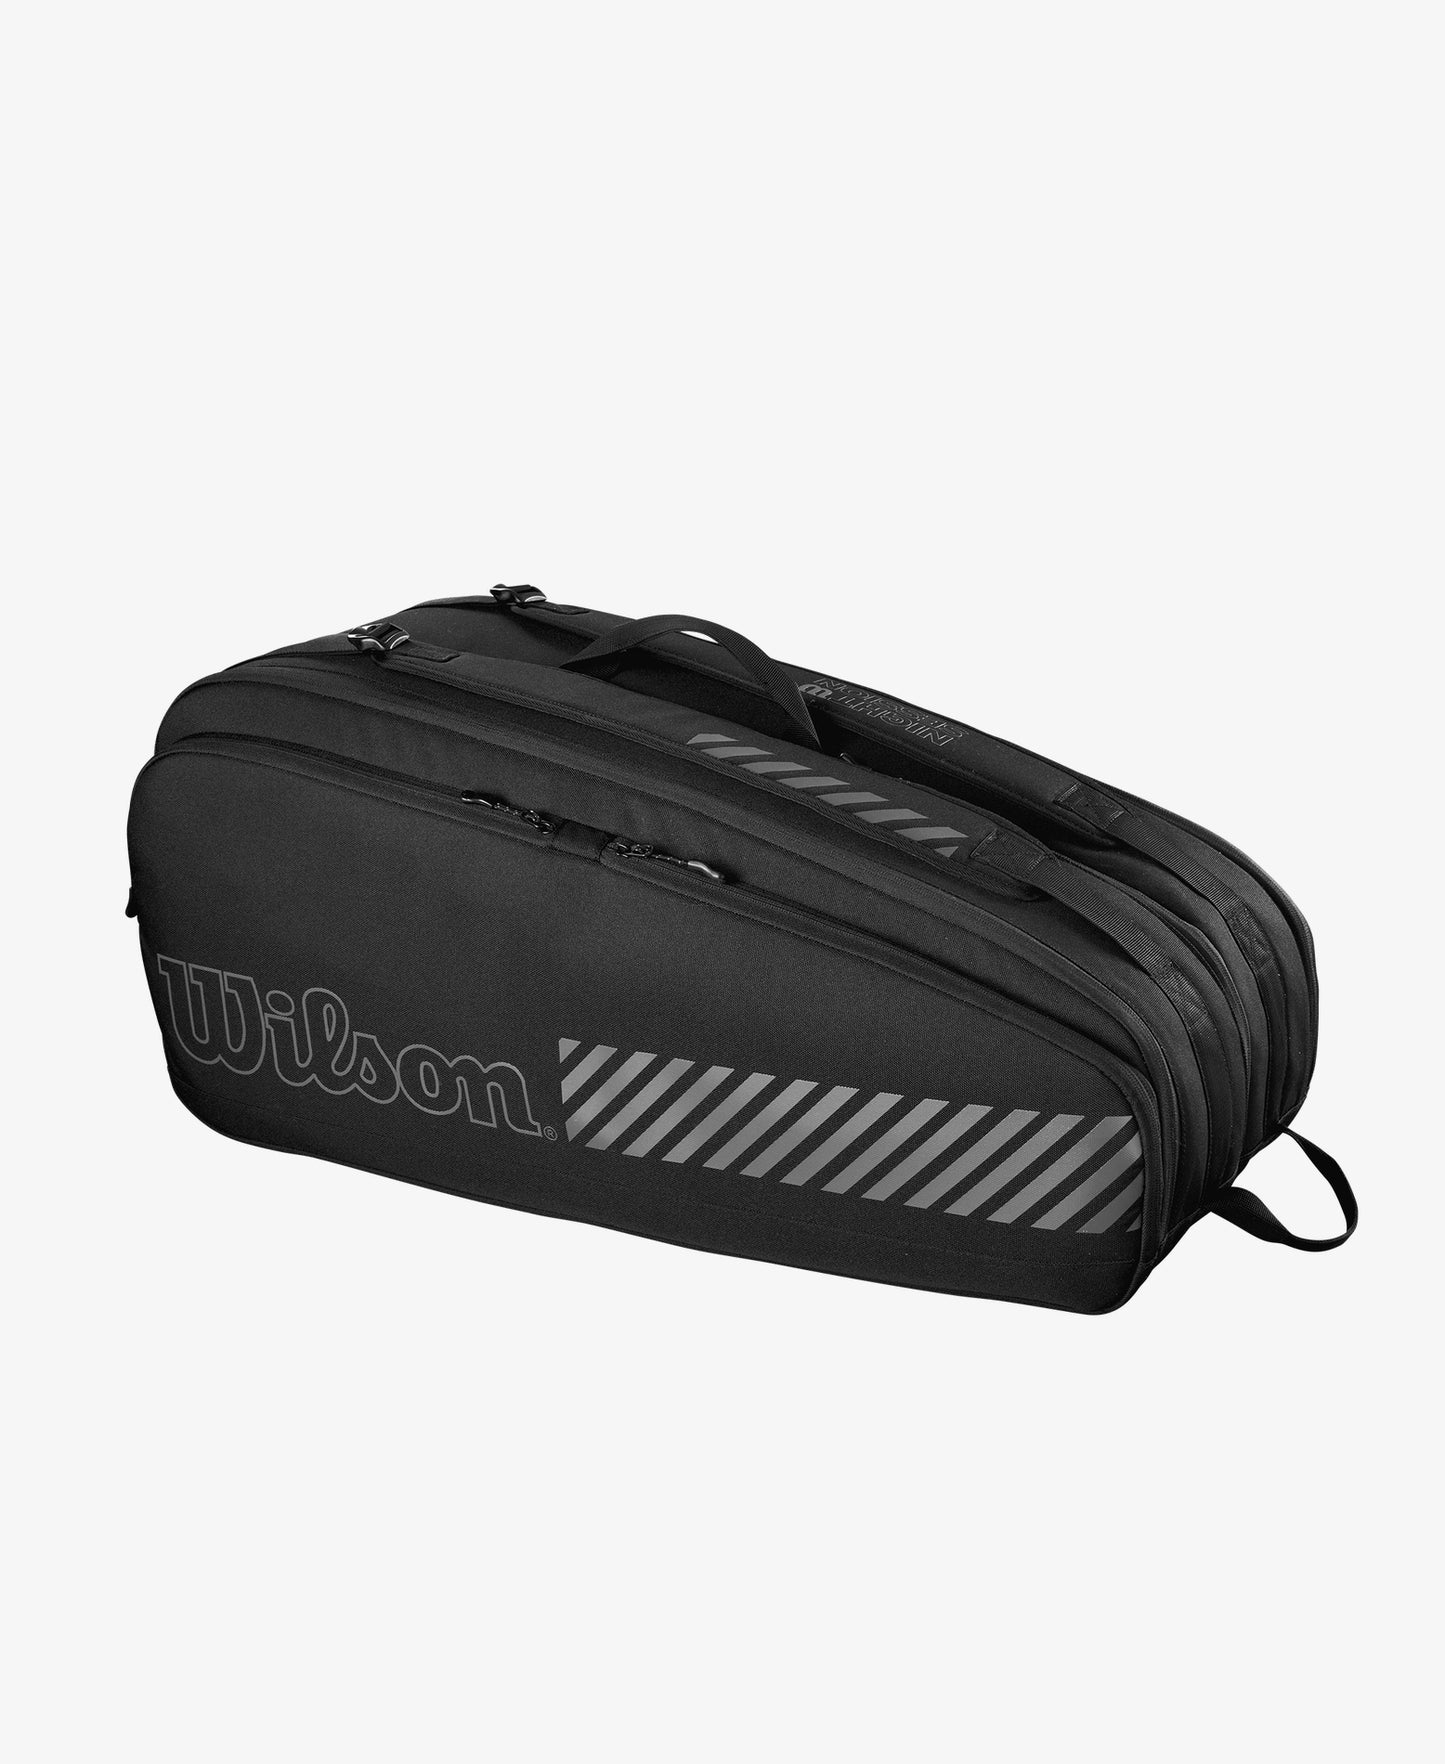 The Wilson Night Session Tour 12 Pack Racket Bag available for sale at GSM Sports.    